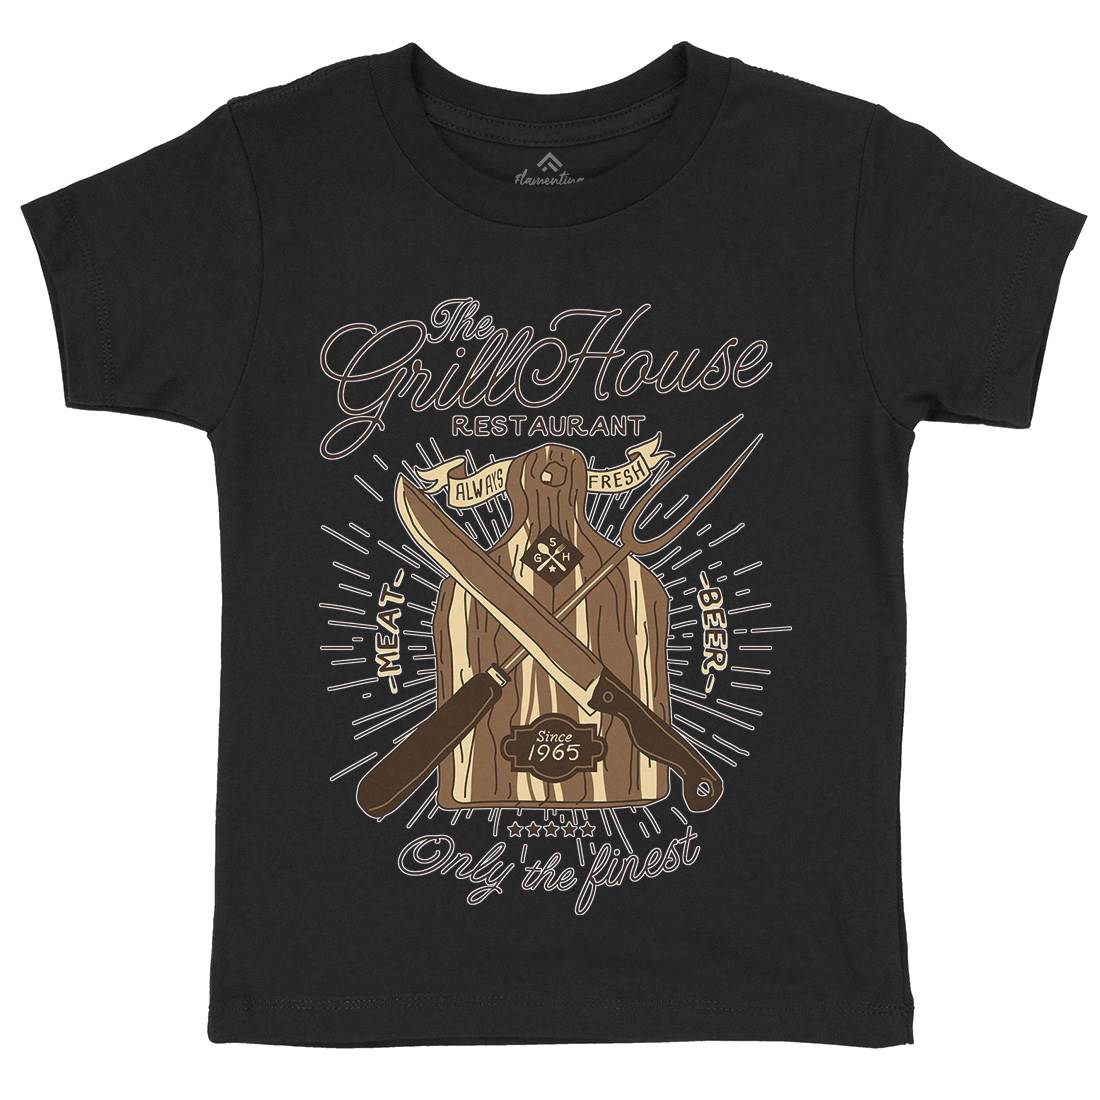 Grill House Kids Crew Neck T-Shirt Food A981